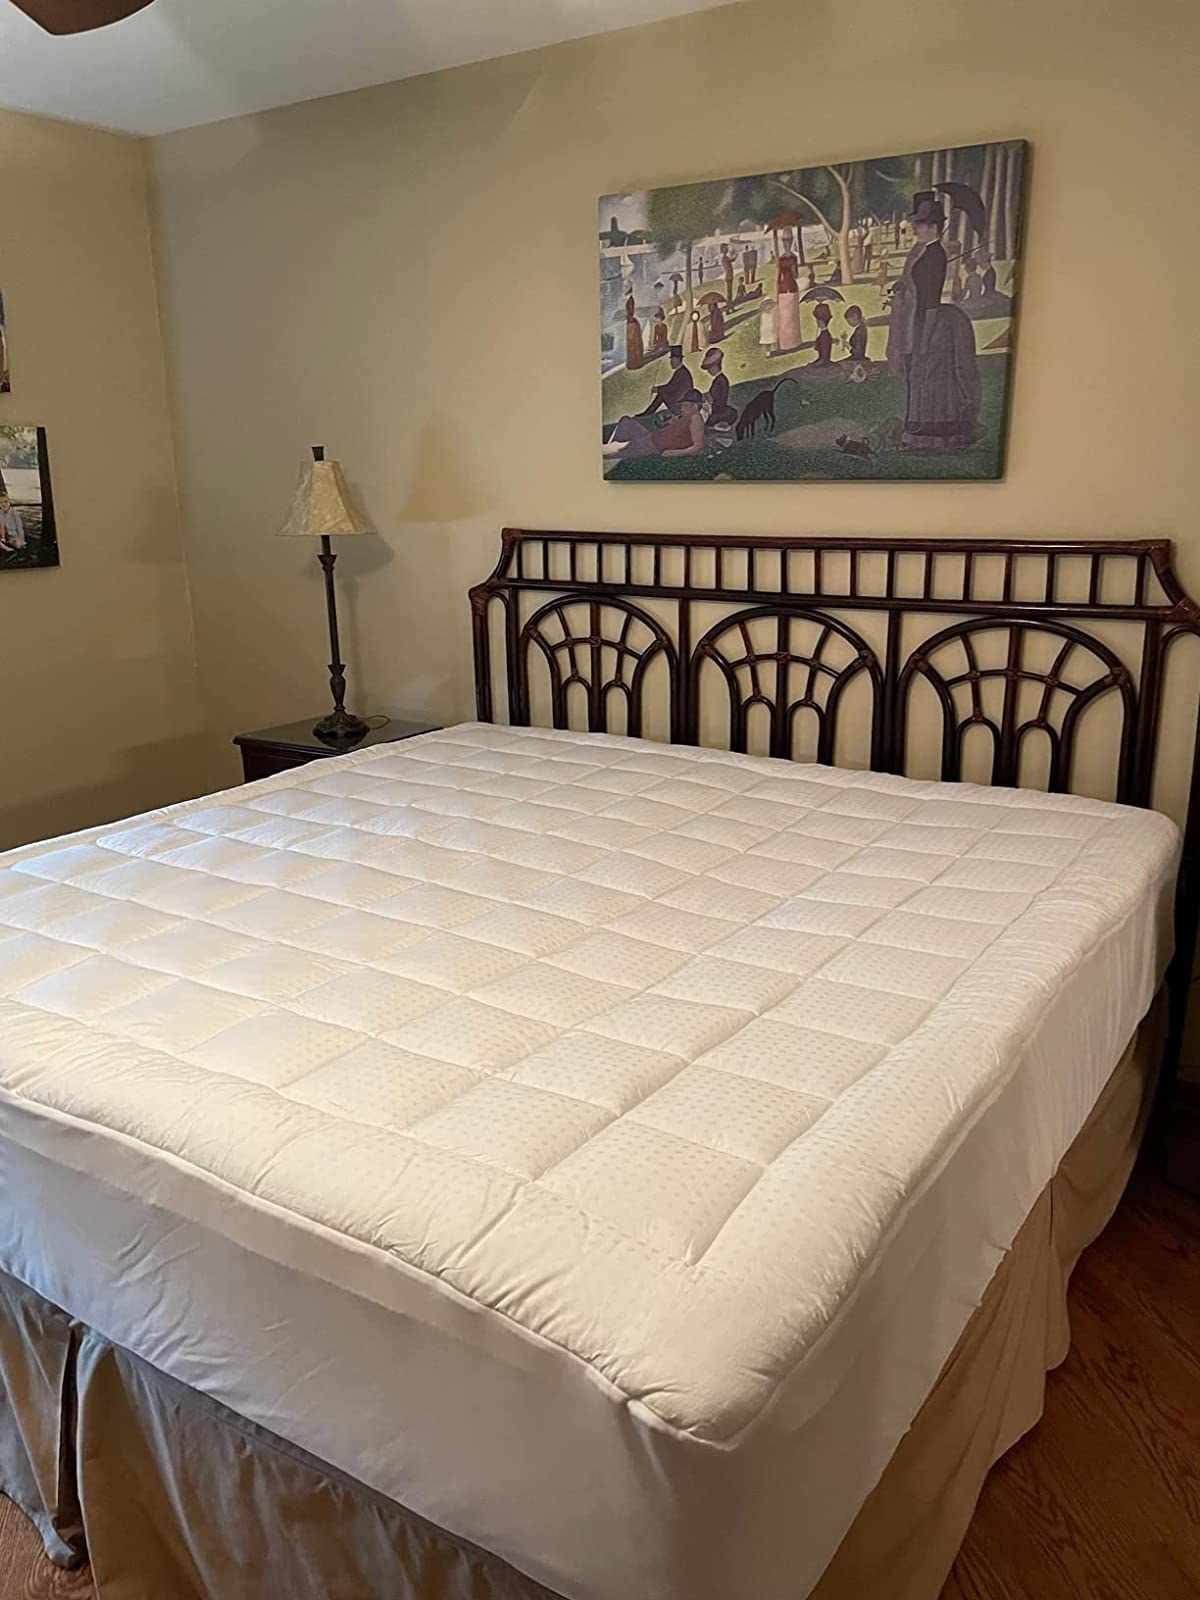 Reviewer image of mattress pad on their bed